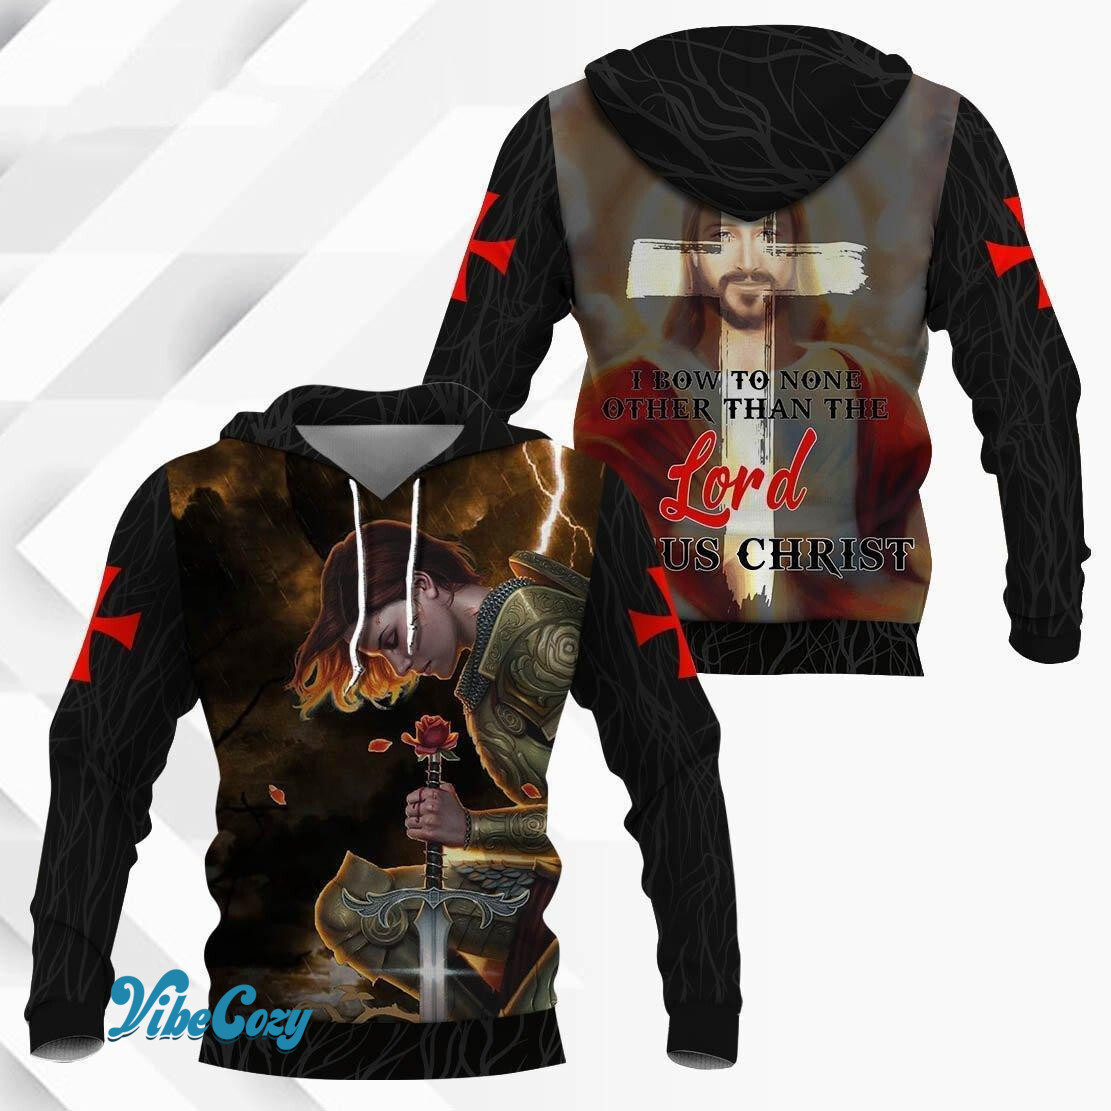 Knight Templar 3D All Over Printed Shirt Hoodie MP932